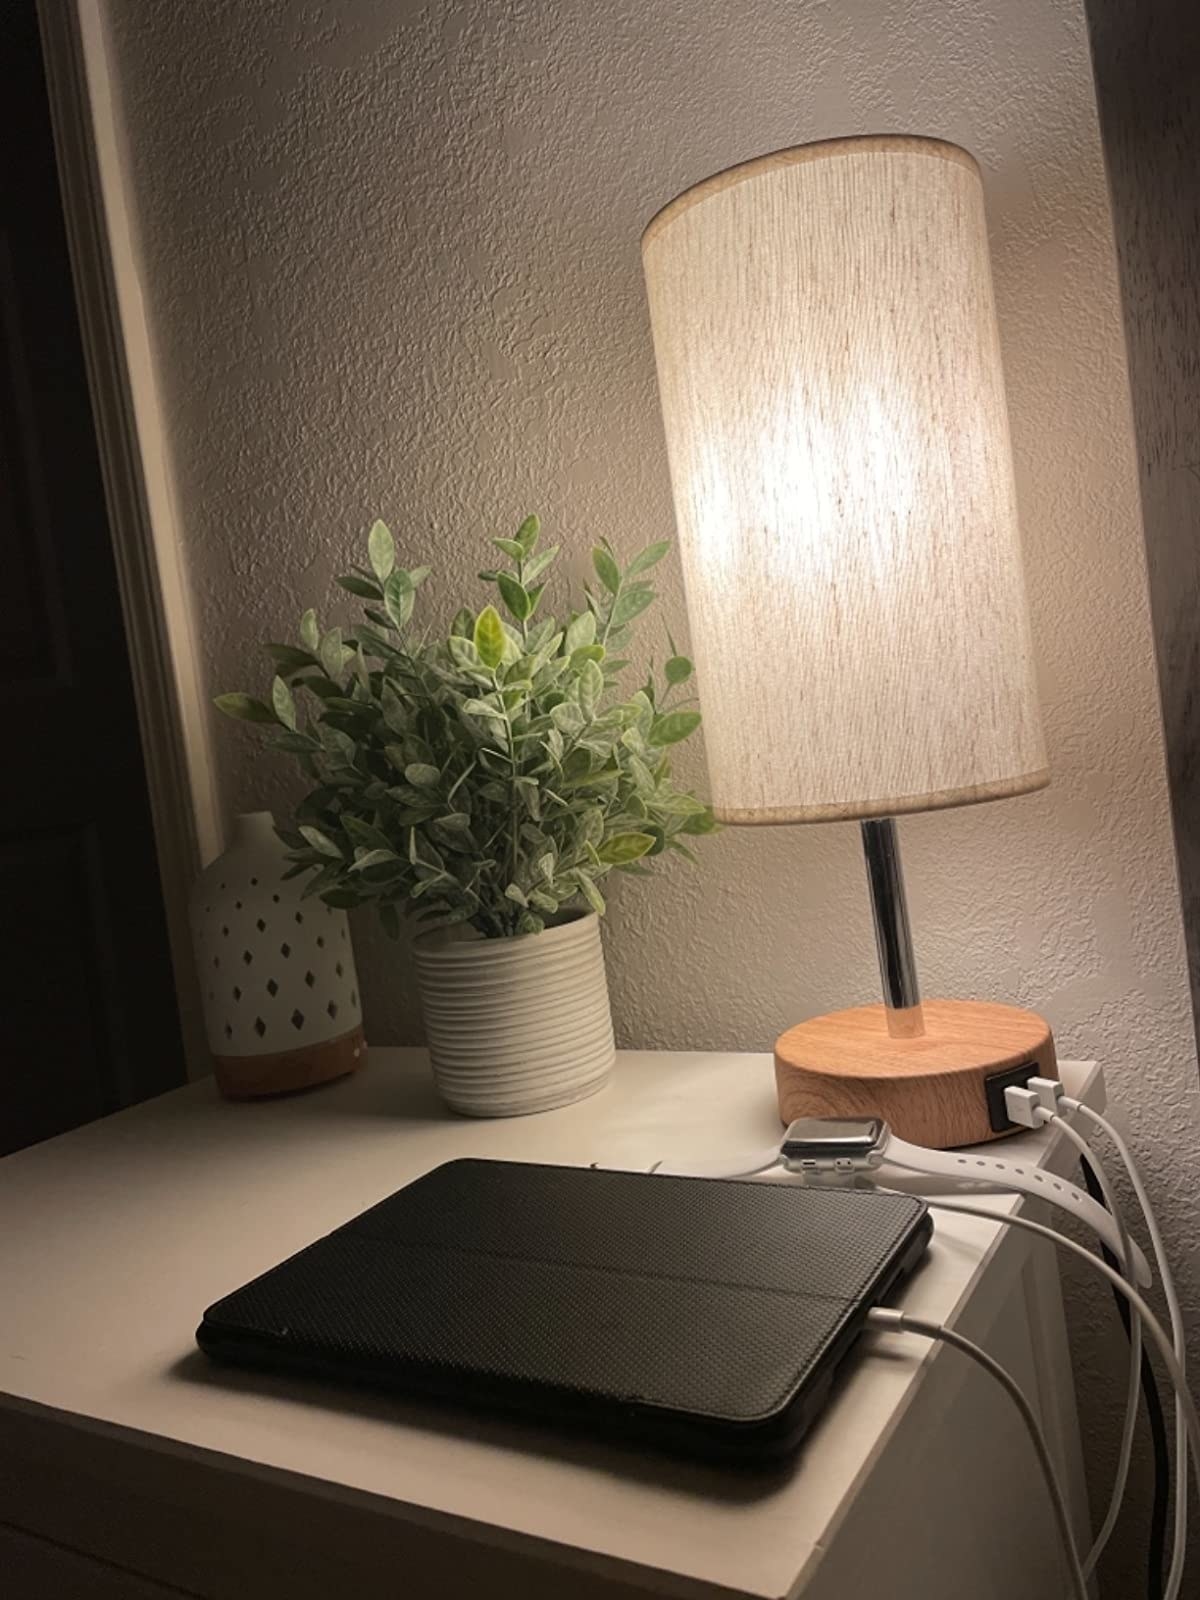 reviewer image of the lamp on a tabletop with a plant and diffuser next to it, and an ipad and apple watch charging in front of it with the cords connected to the two USB ports in the lamp